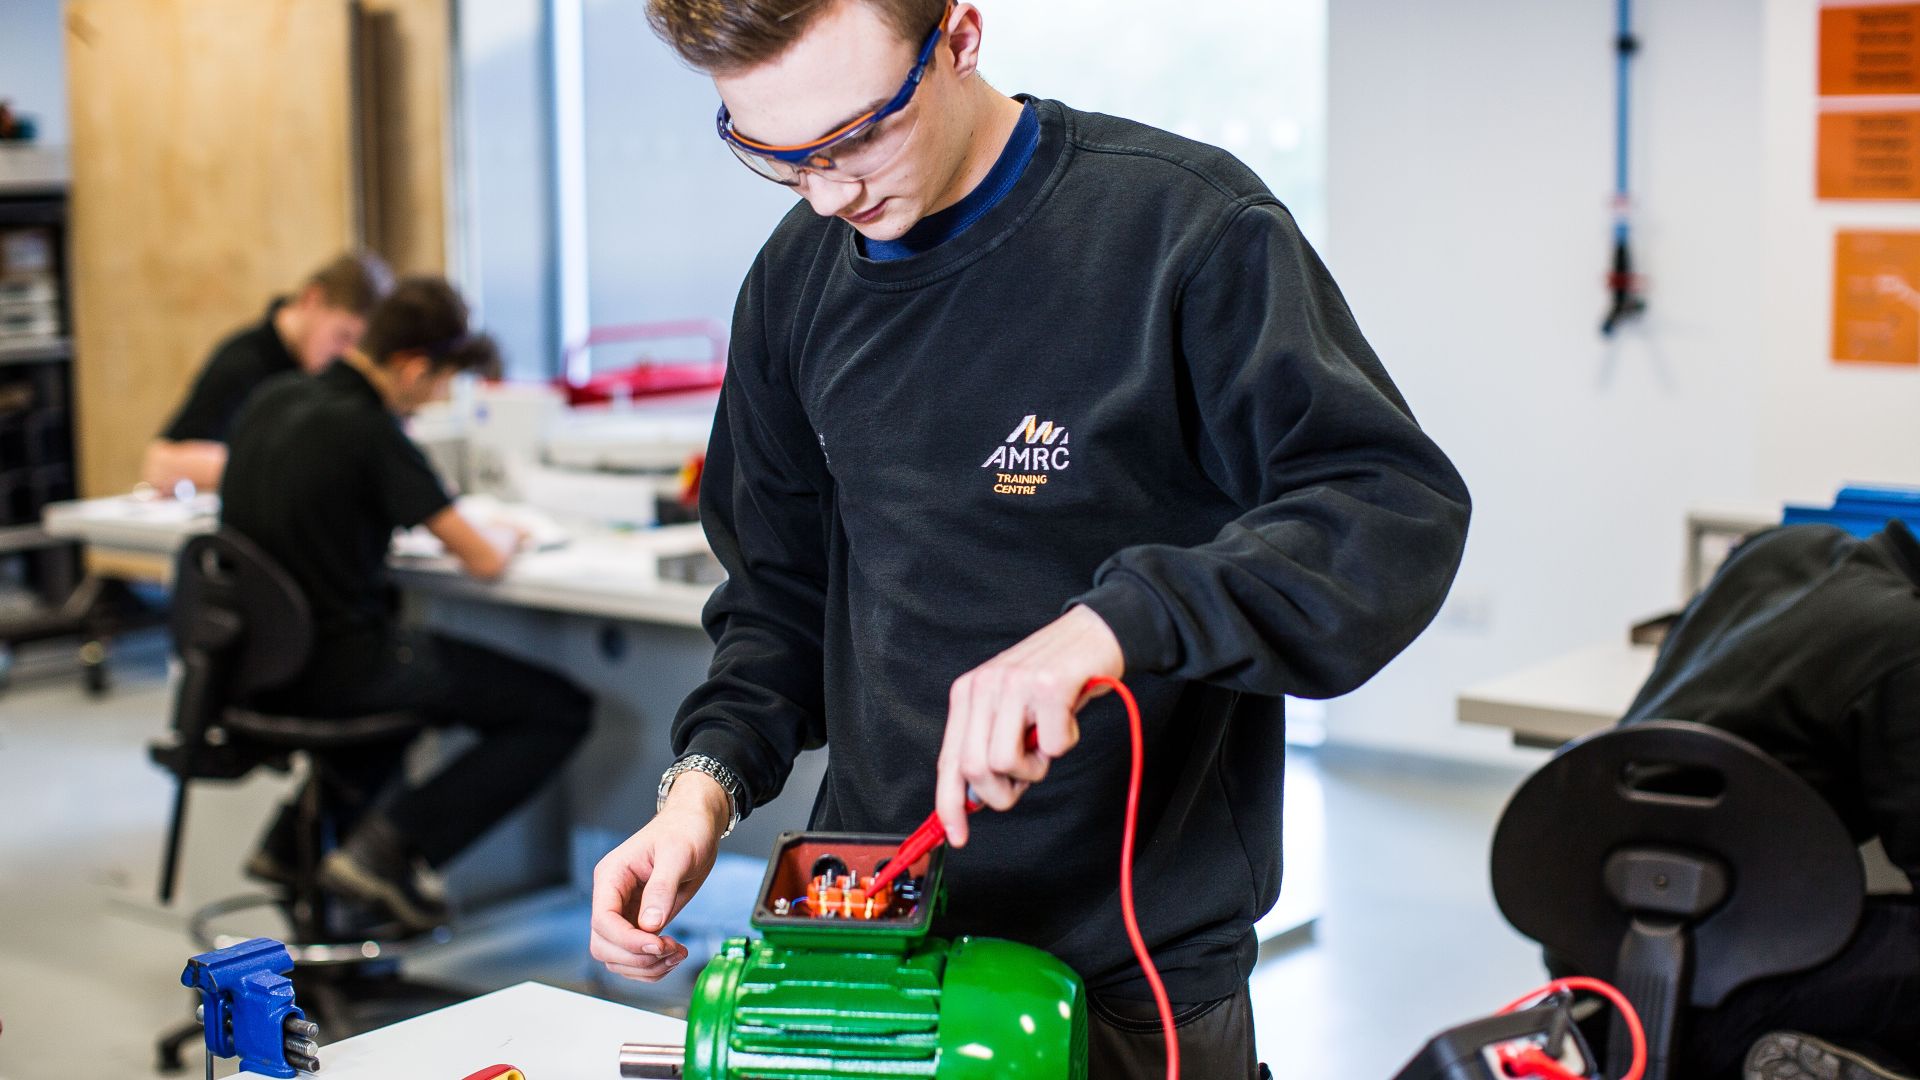 Mechanical Assembly Apprentice Apply For Apprenticeship AMRC Training